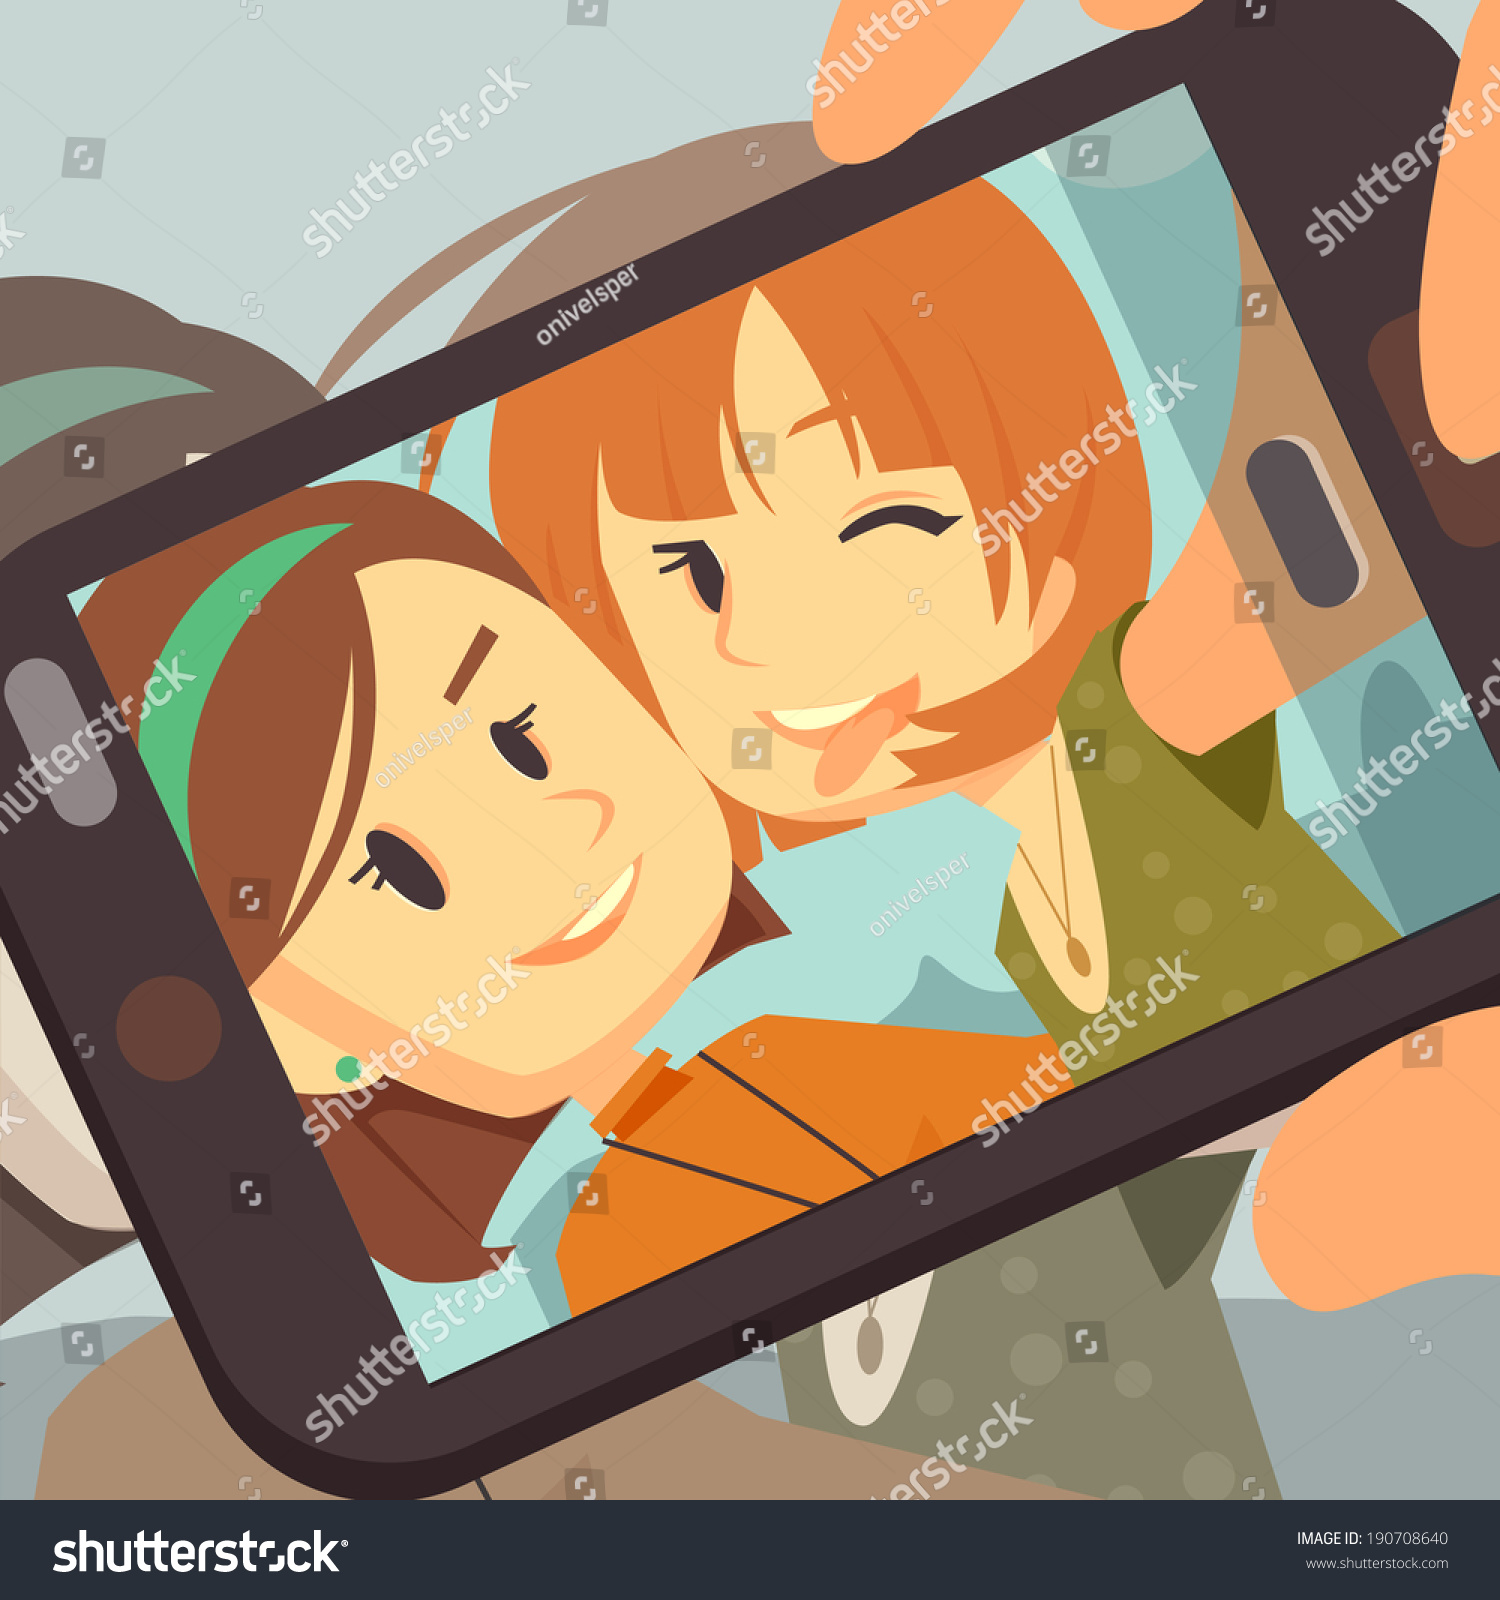 Two Girl Friends Taking A Selfie Together Using Their Phone Stock Vector Illustration 190708640